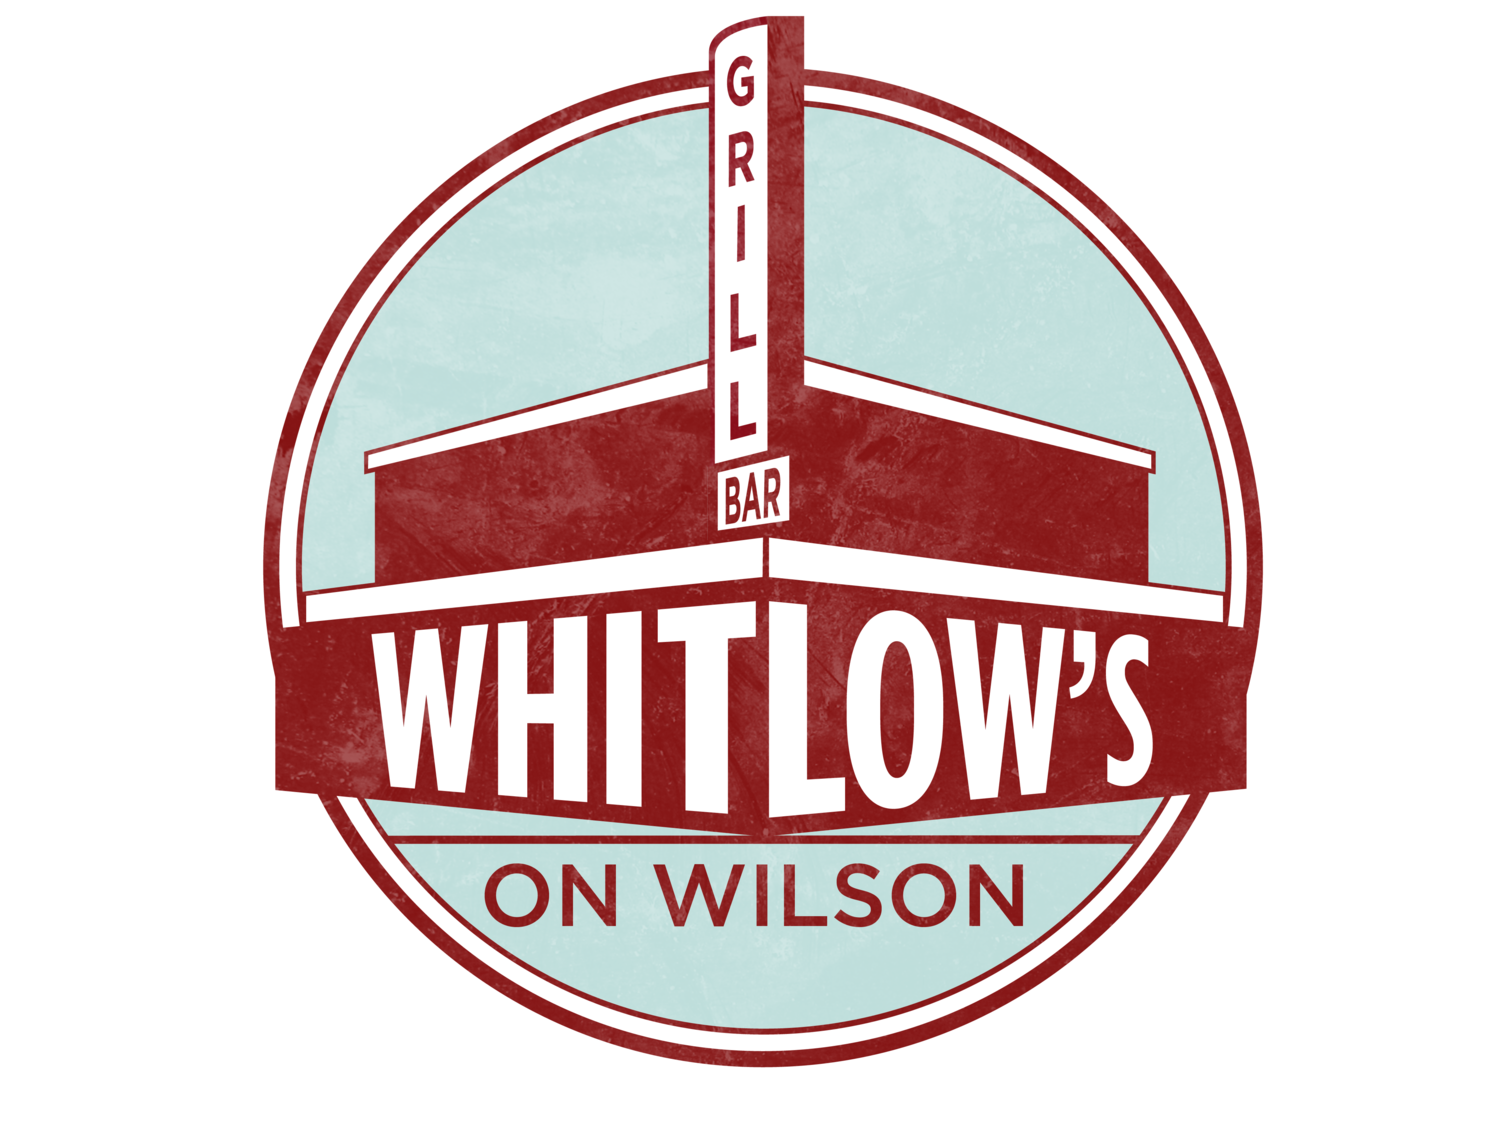 Whitlow's On Wilson